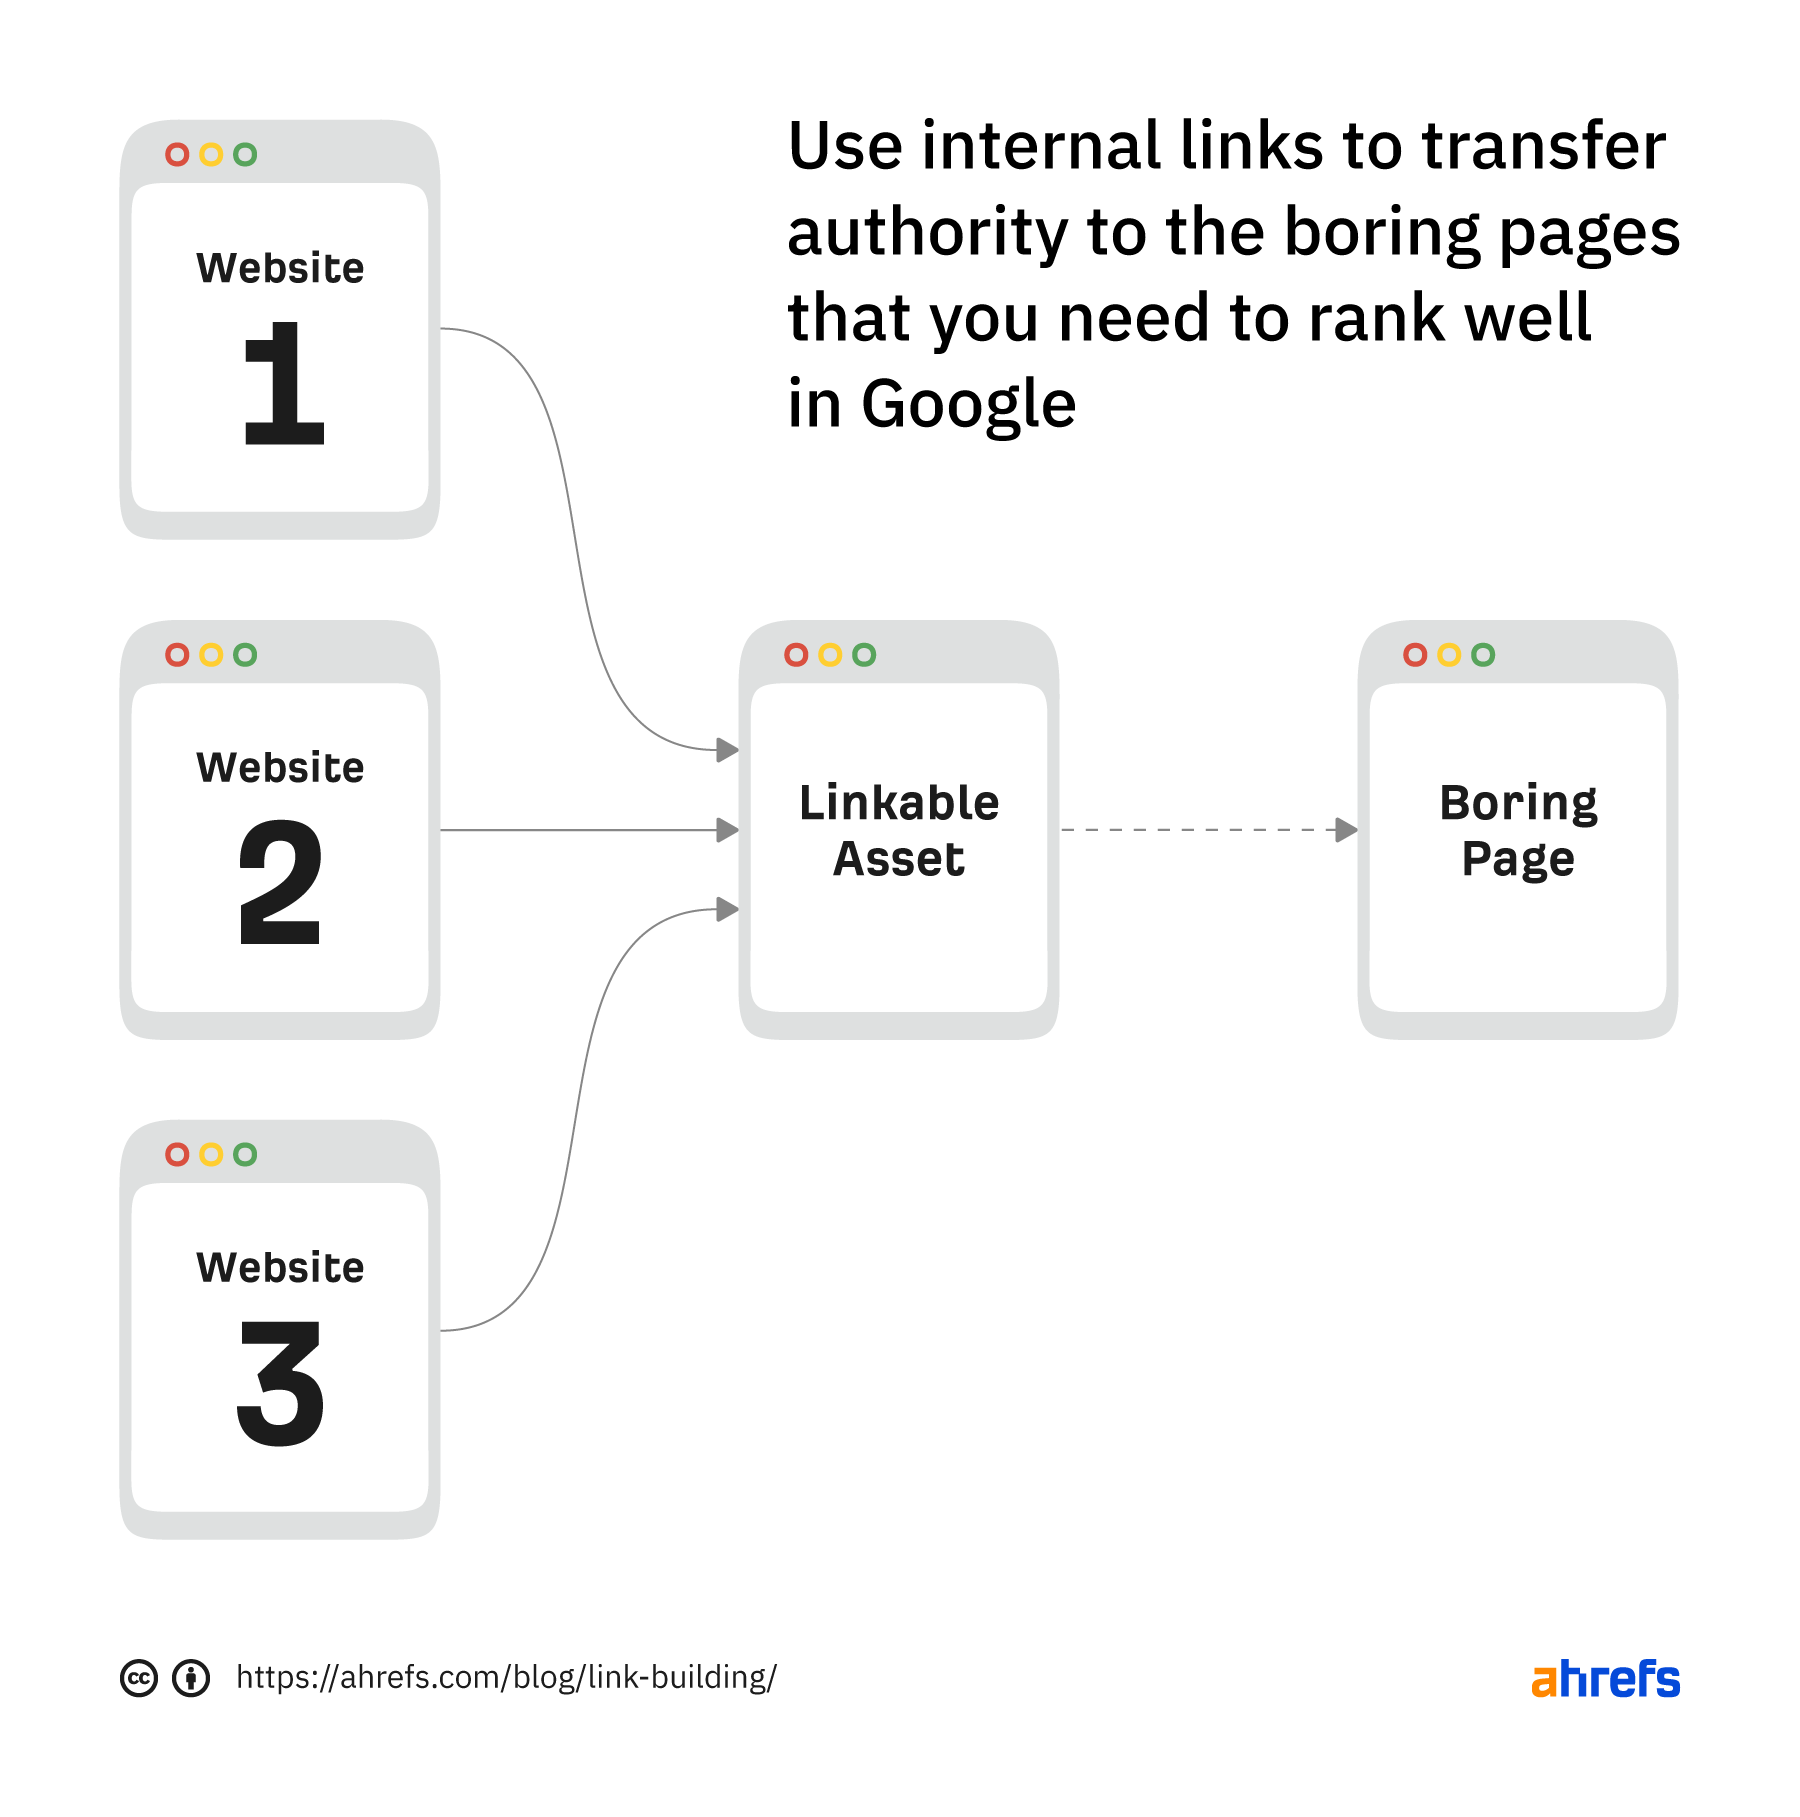 Use internal links to transfer authority to the boring pages that you need to rank well in Google